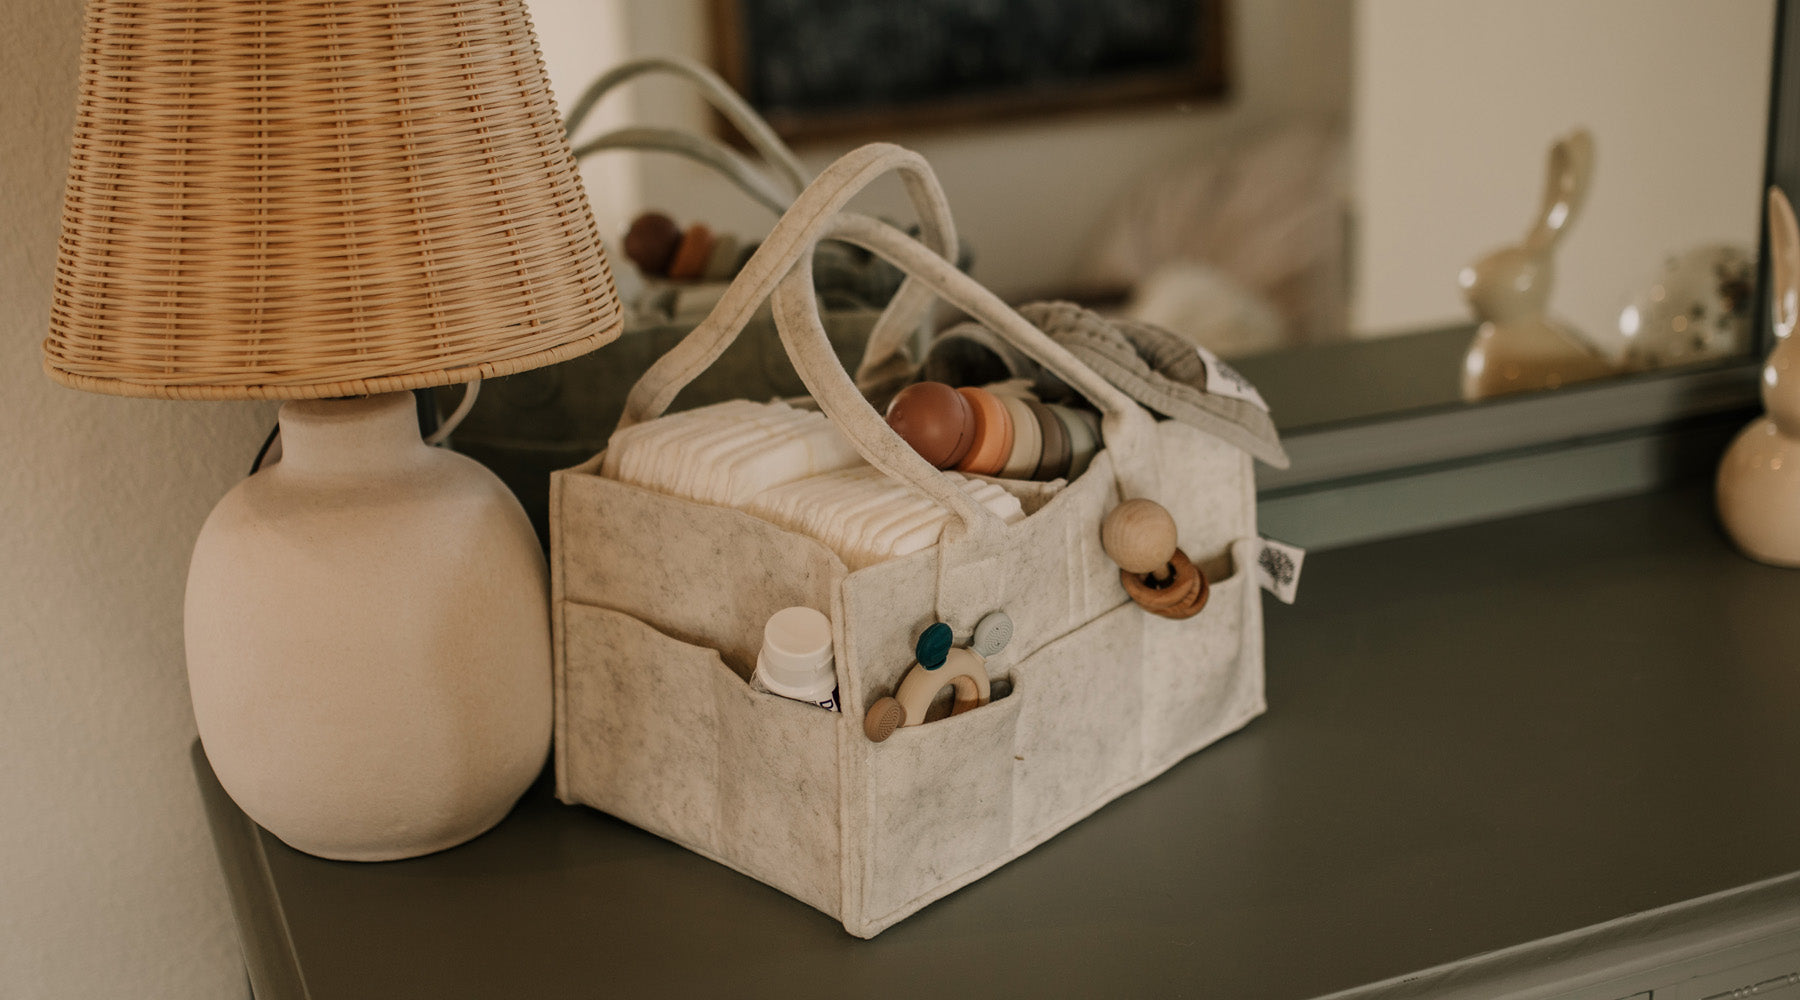 An In-Depth Review of the Parker Baby Co. Felt Diaper Caddy